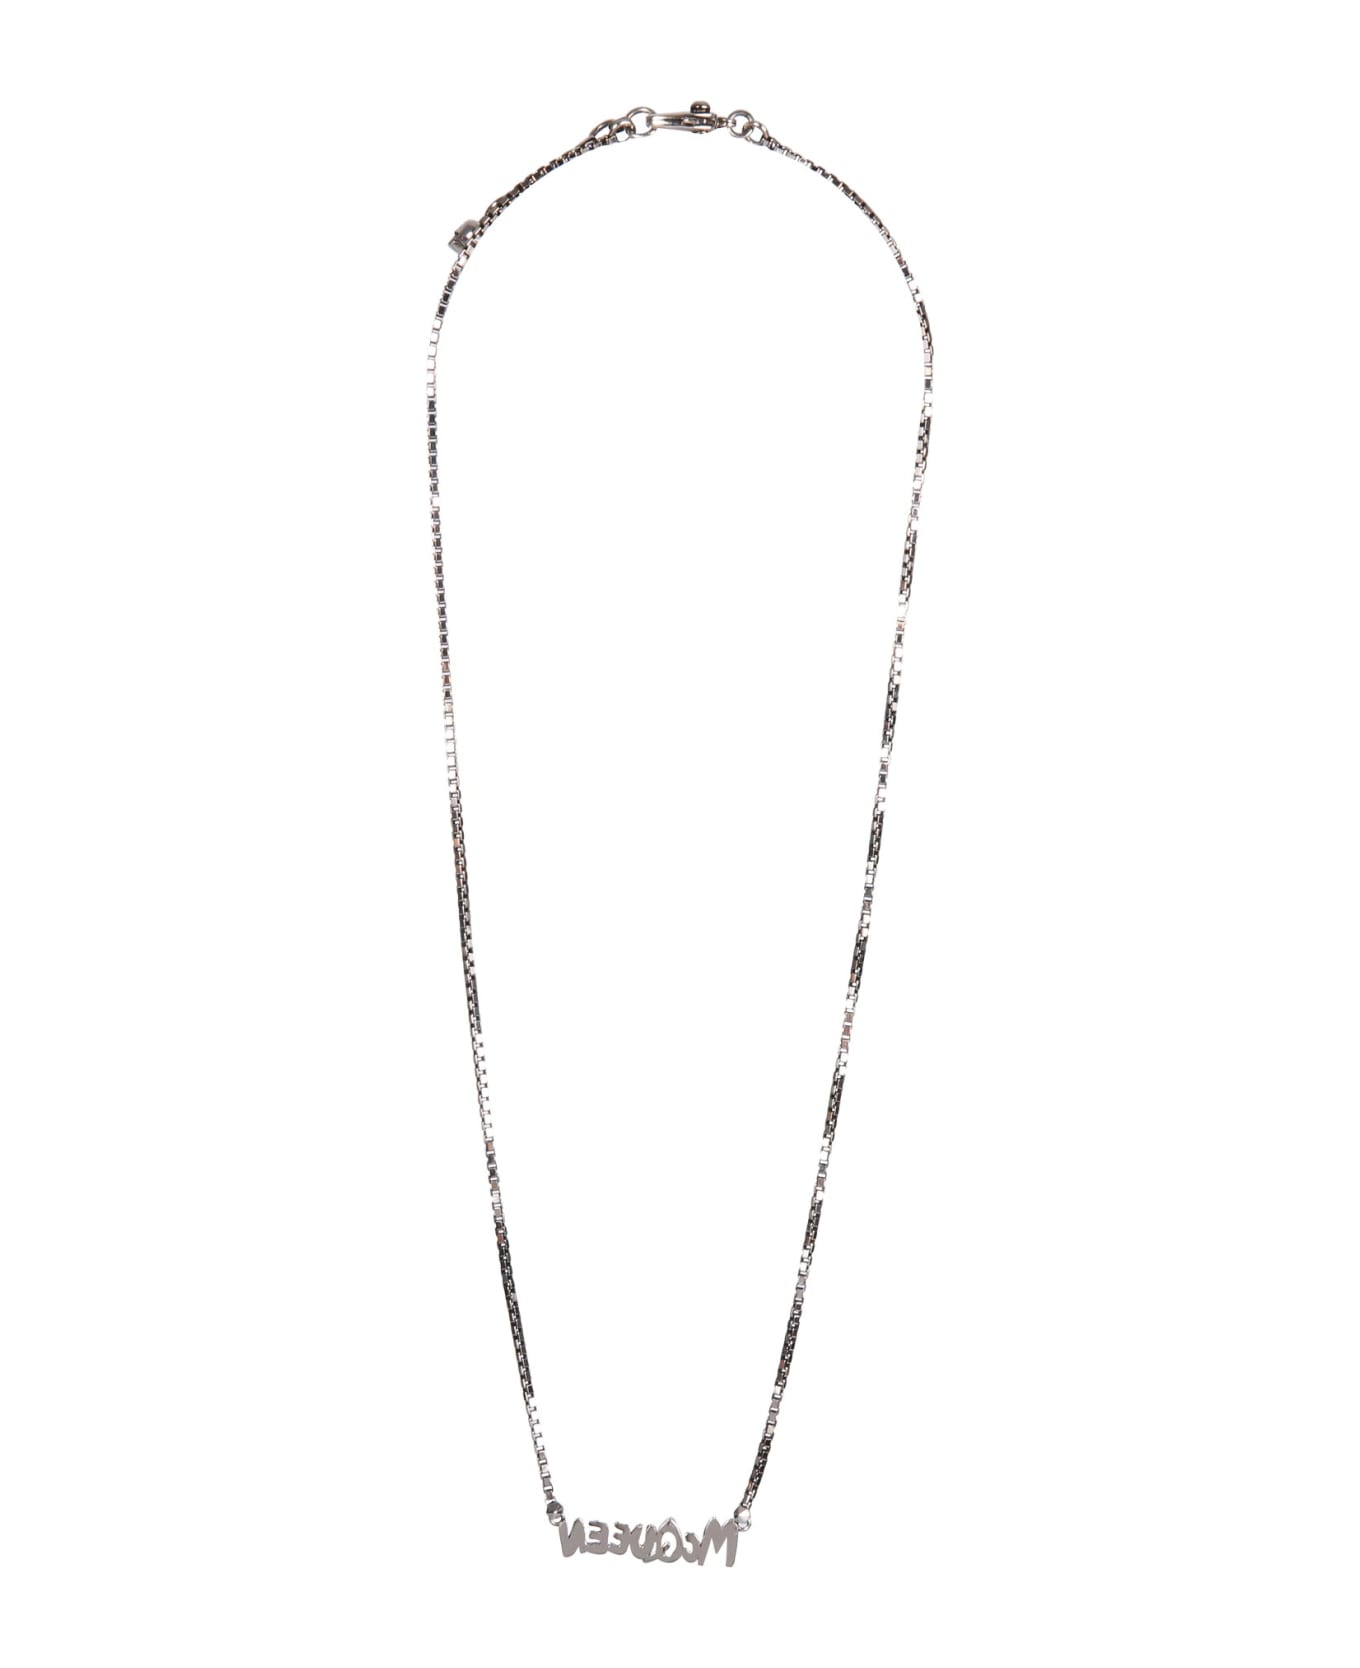 Alexander McQueen Logo Charm Necklace - ARGENTO ネックレス